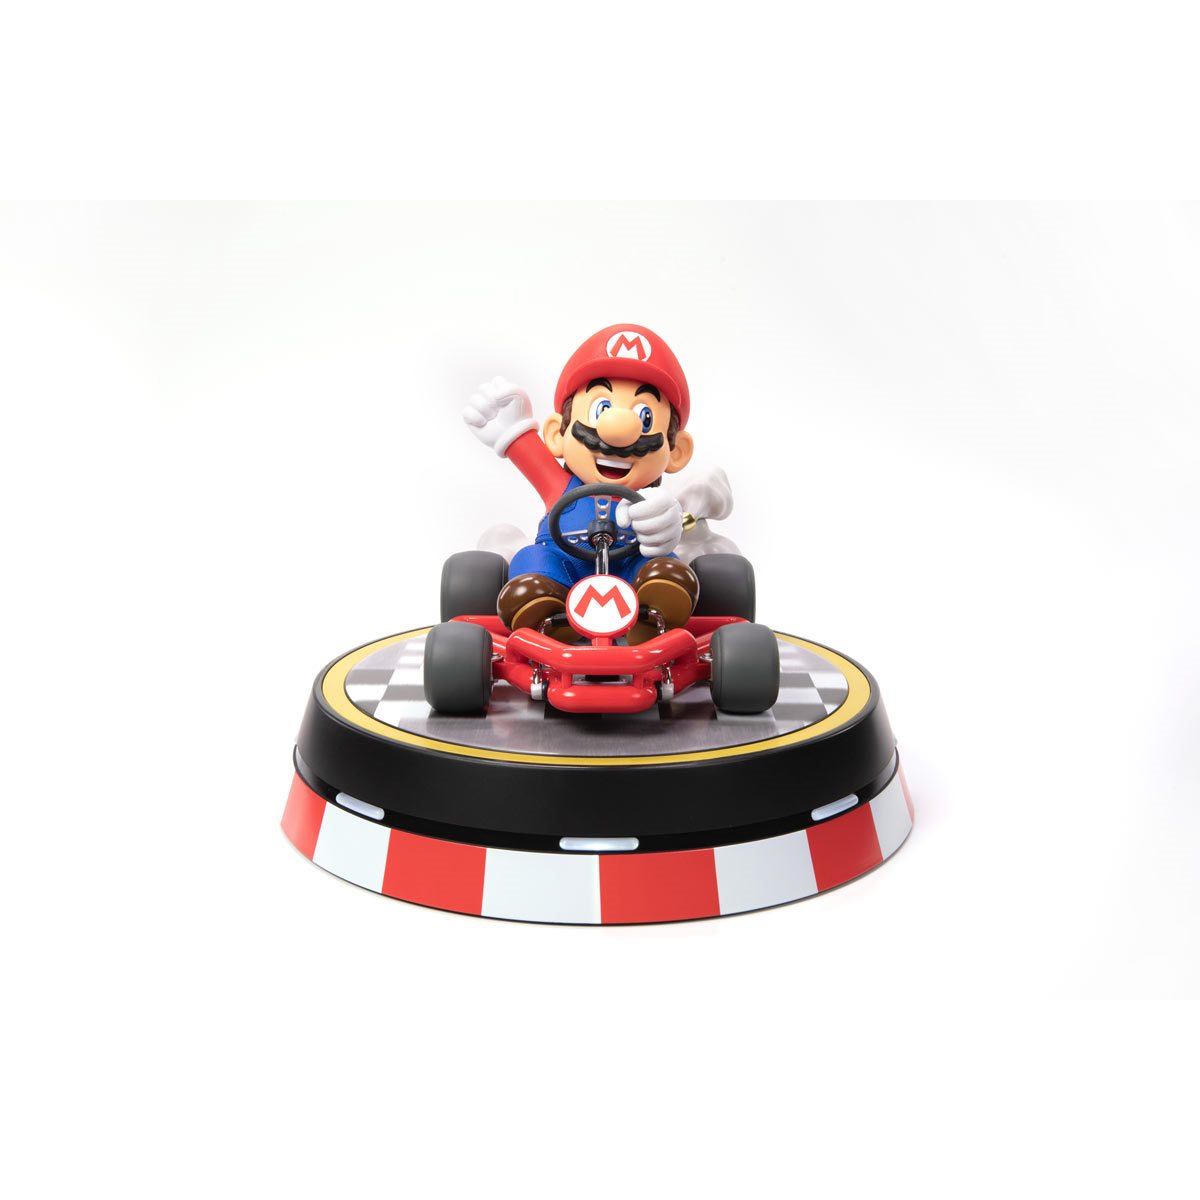 700274mb Mario Kart Ultimate Art Set in Clamshell - Over 150 Pieces for  sale online